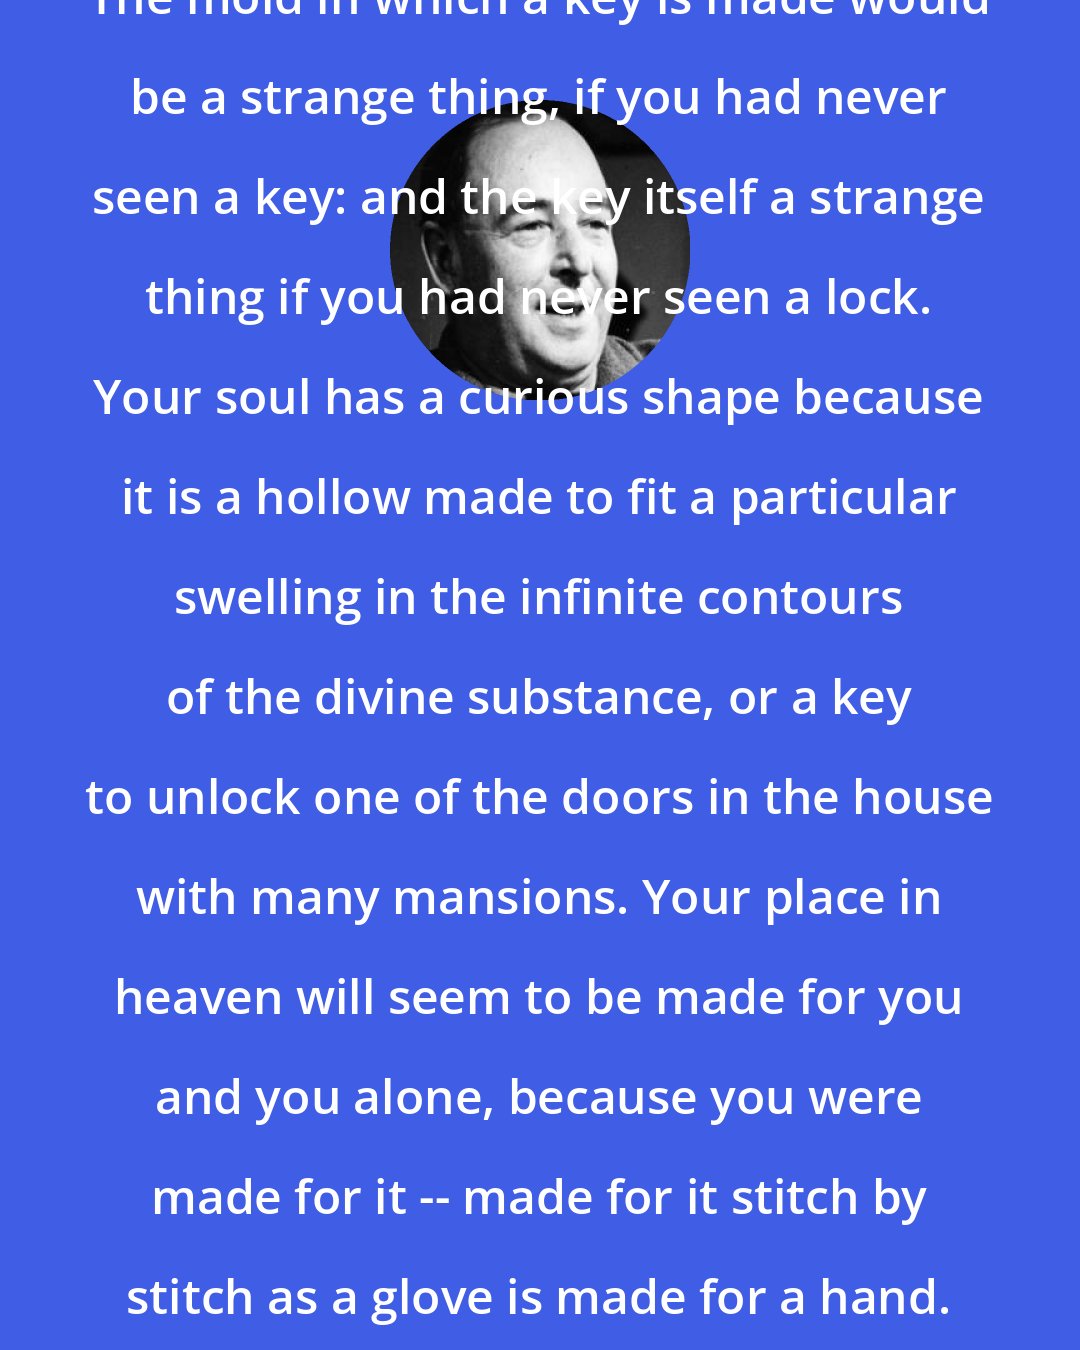 C. S. Lewis: The mold in which a key is made would be a strange thing, if you had never seen a key: and the key itself a strange thing if you had never seen a lock. Your soul has a curious shape because it is a hollow made to fit a particular swelling in the infinite contours of the divine substance, or a key to unlock one of the doors in the house with many mansions. Your place in heaven will seem to be made for you and you alone, because you were made for it -- made for it stitch by stitch as a glove is made for a hand.